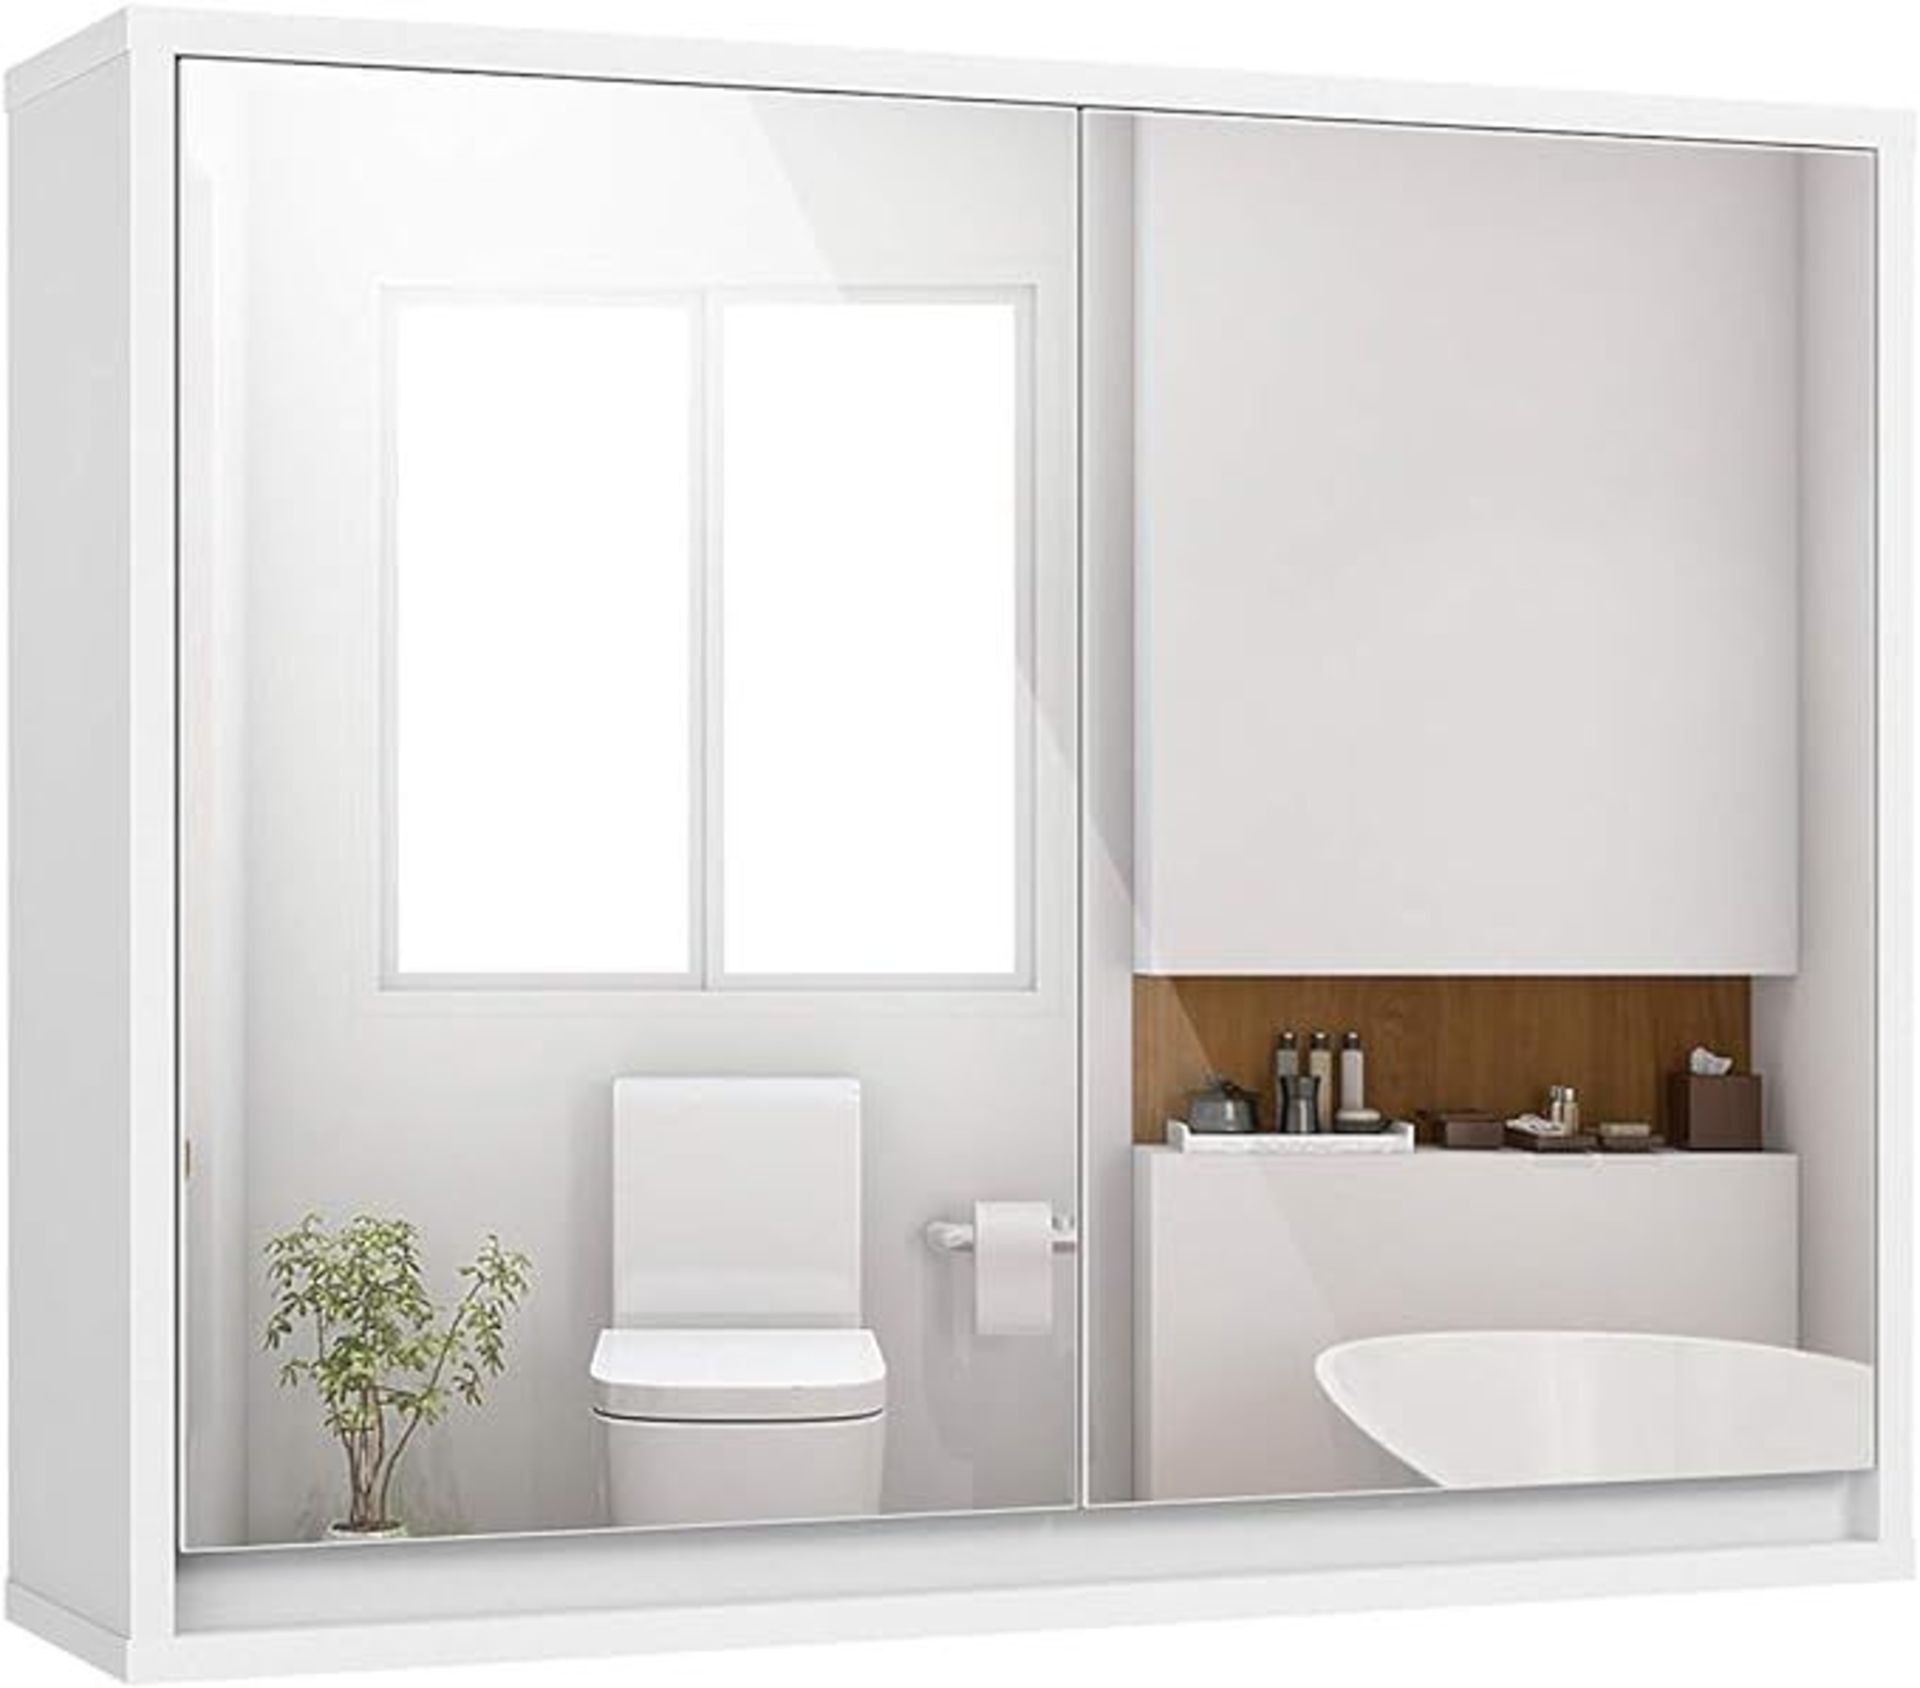 COSTWAY Bathroom Mirror Cabinet, Wall Mounted Storage Cupboard with Shelf, Home Kitchen Living